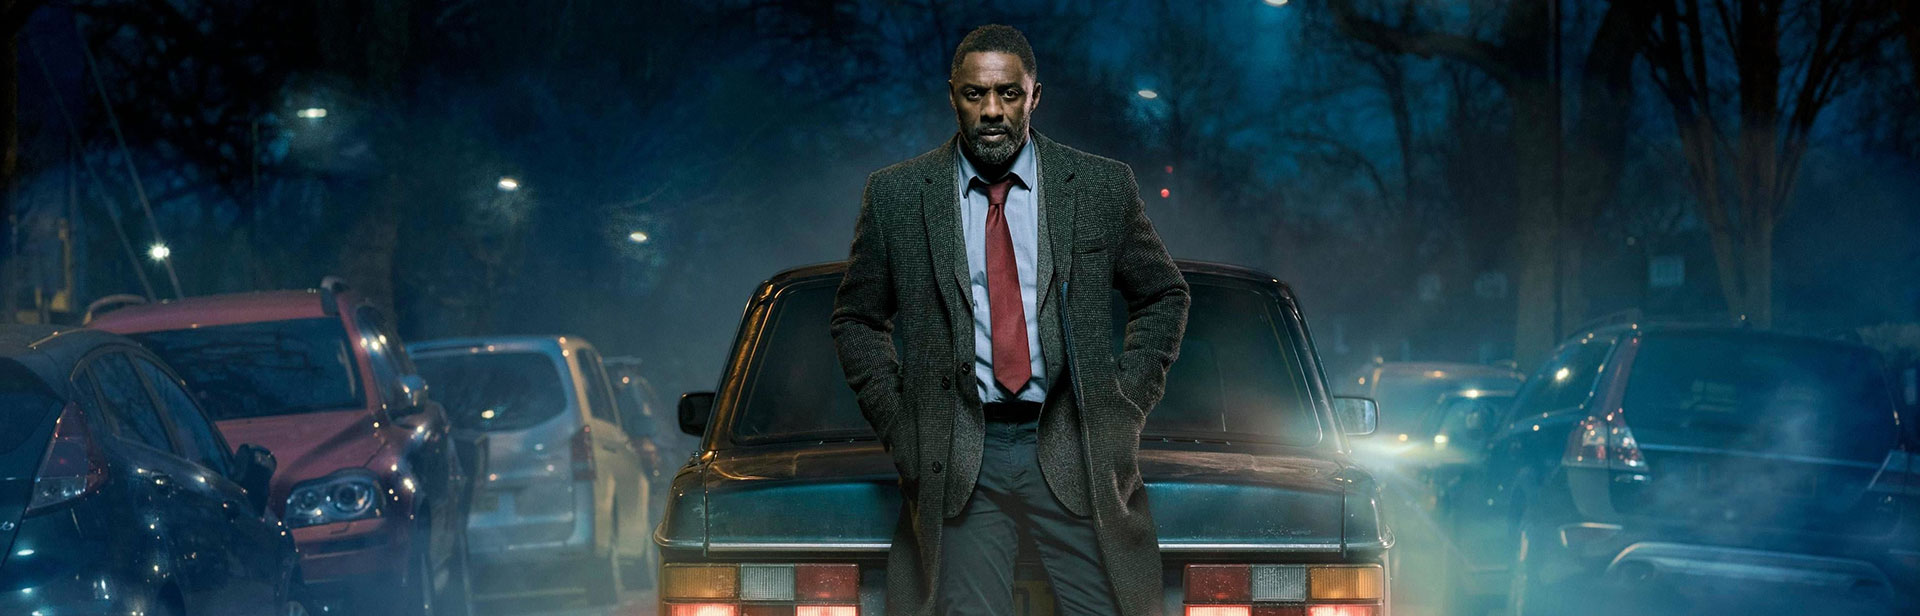 Spoiler Alert: Here’s The Biggest Plot Twist From Luther Season 5